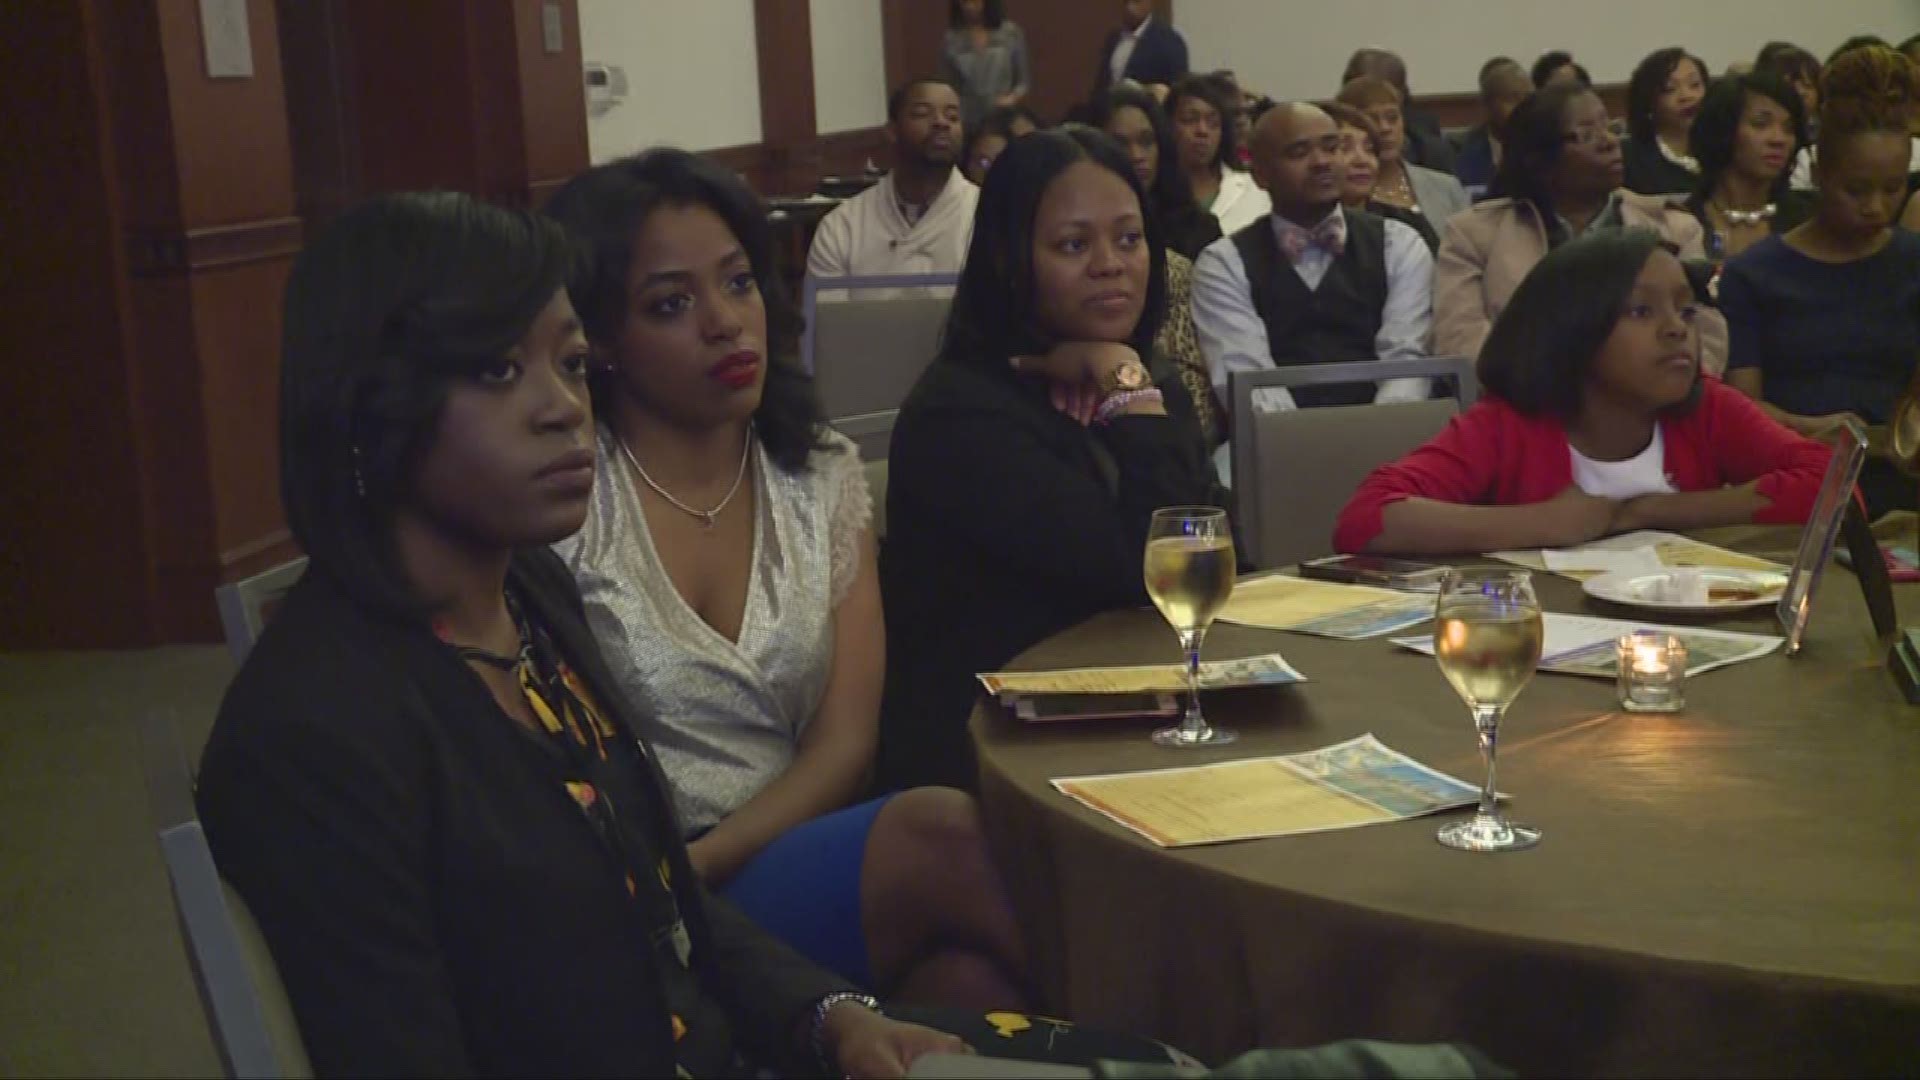 13th annual Who's Who in Black Cleveland reception held